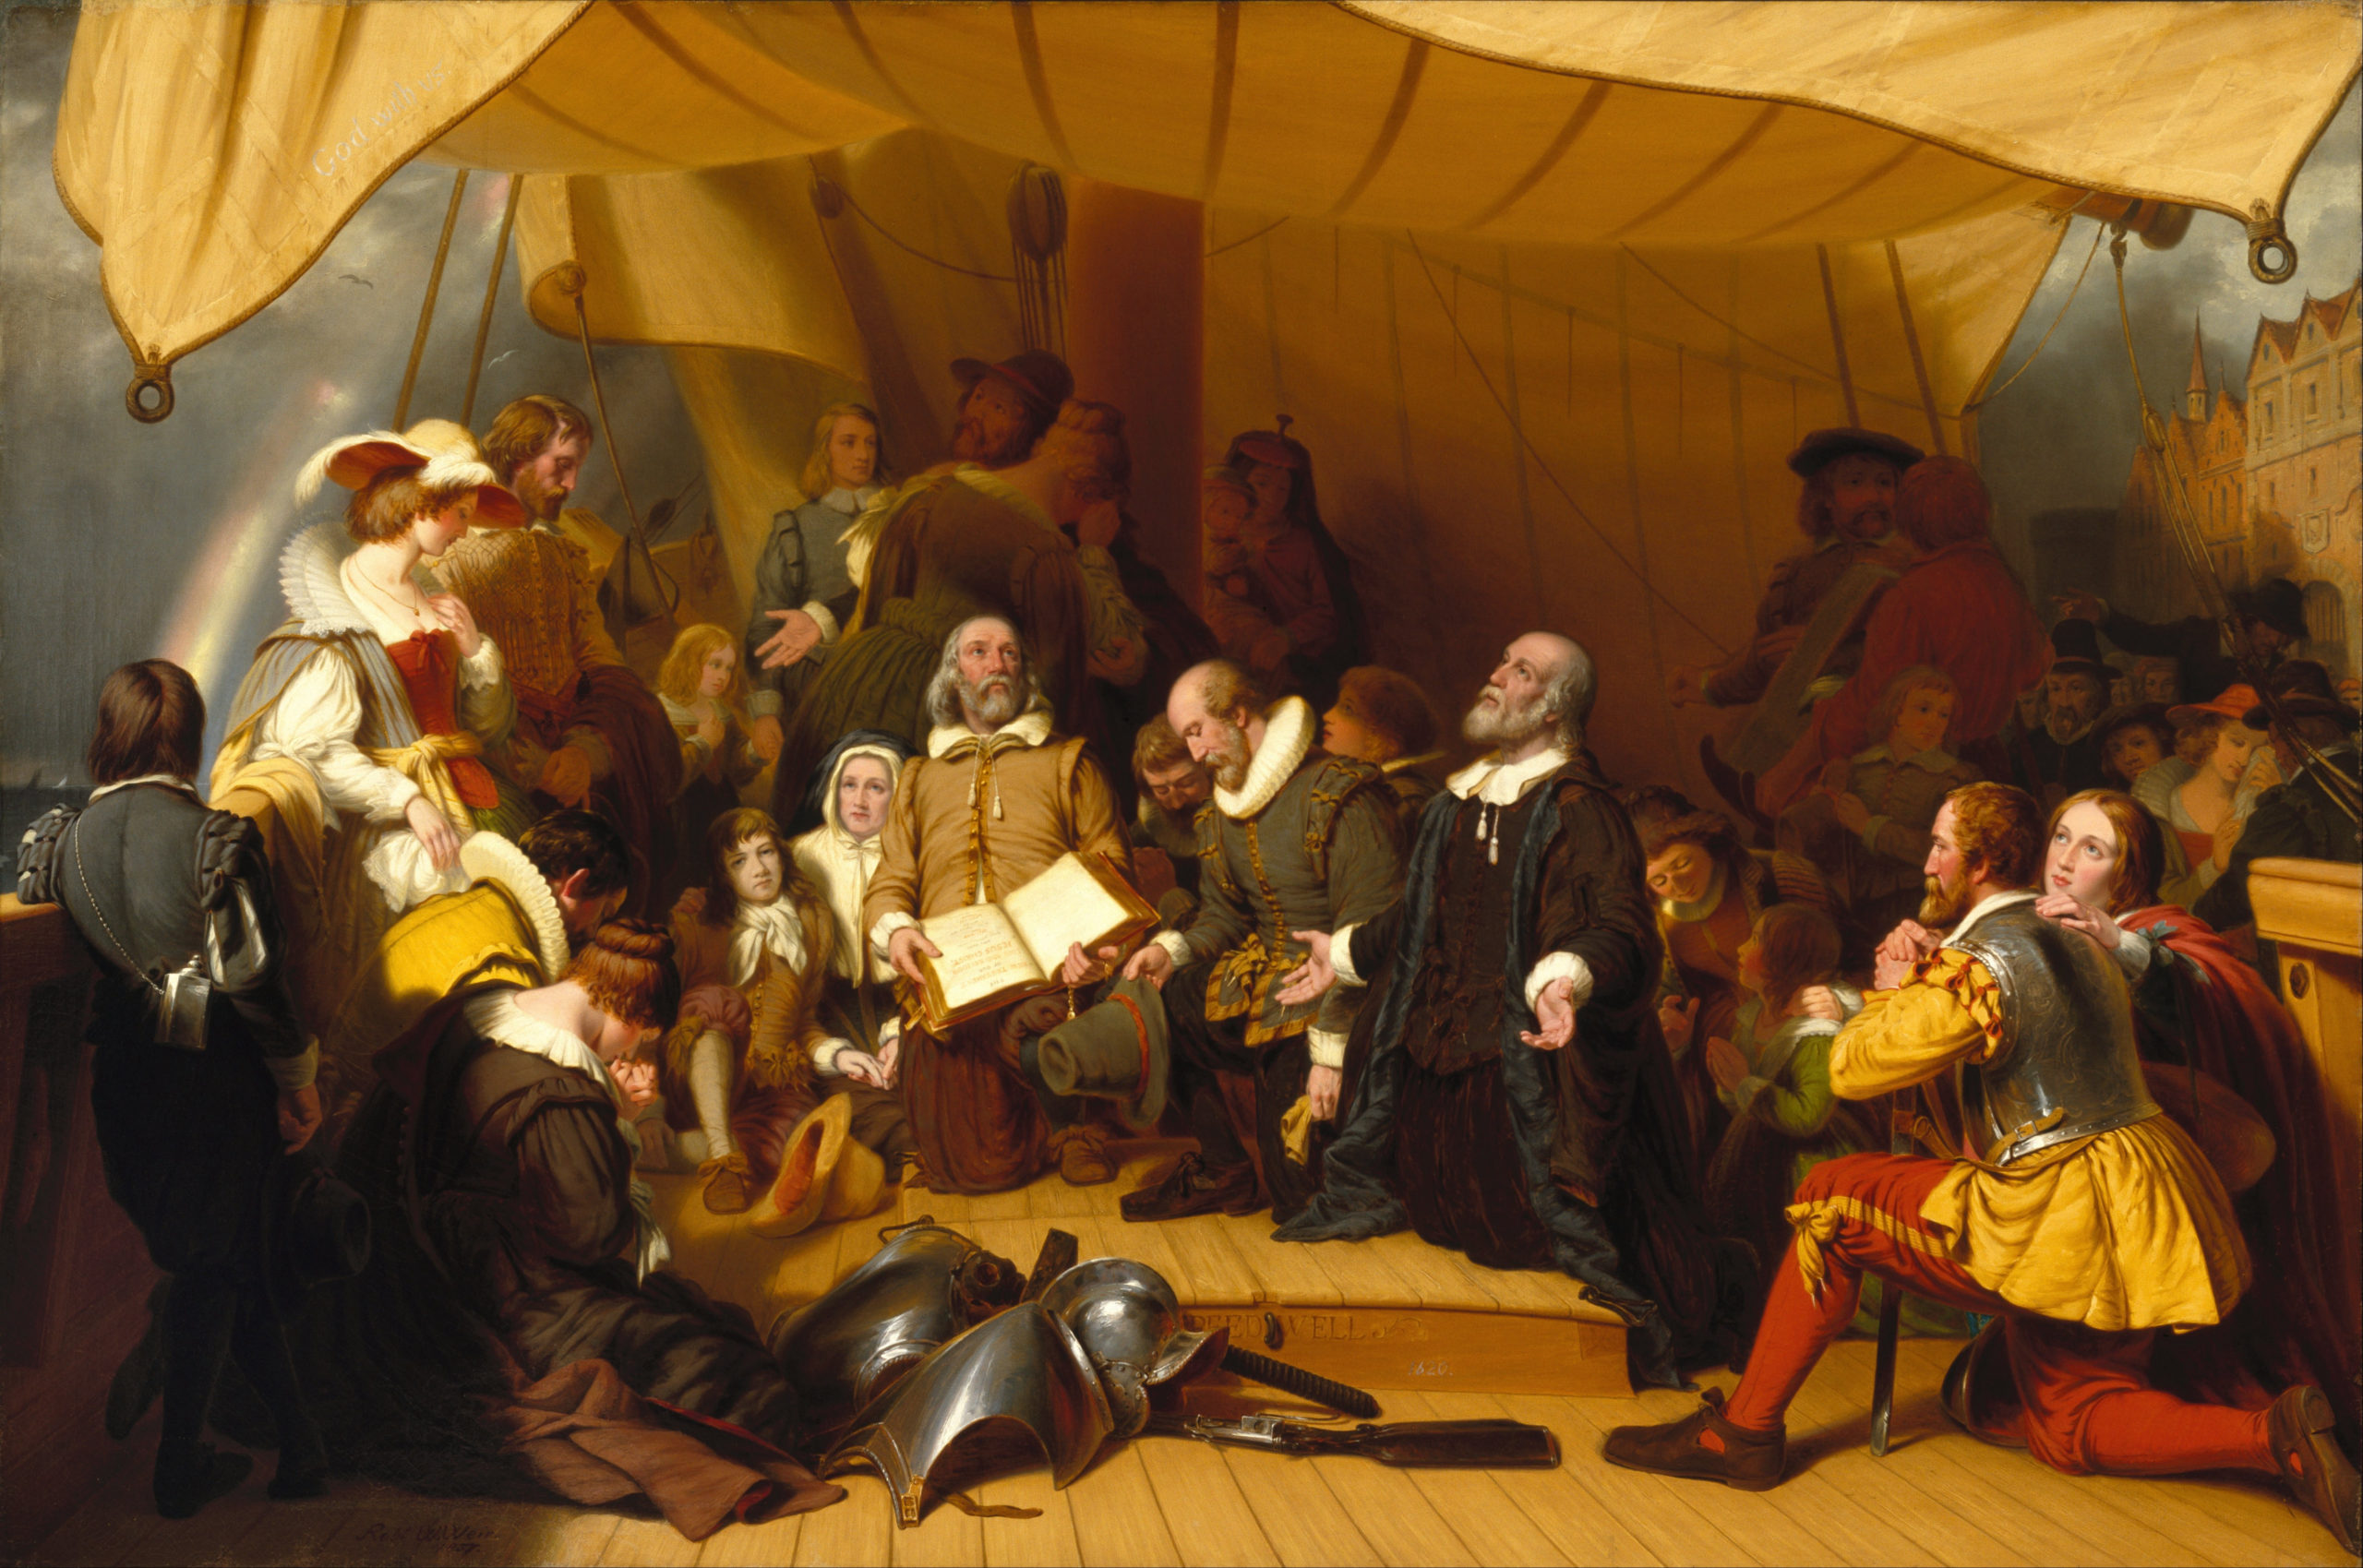 The Embarkation of the Pilgrims (1857), by American painter Robert Walter Weir. (Illustration: Public Domain, Brooklyn Museum, Fair Use)